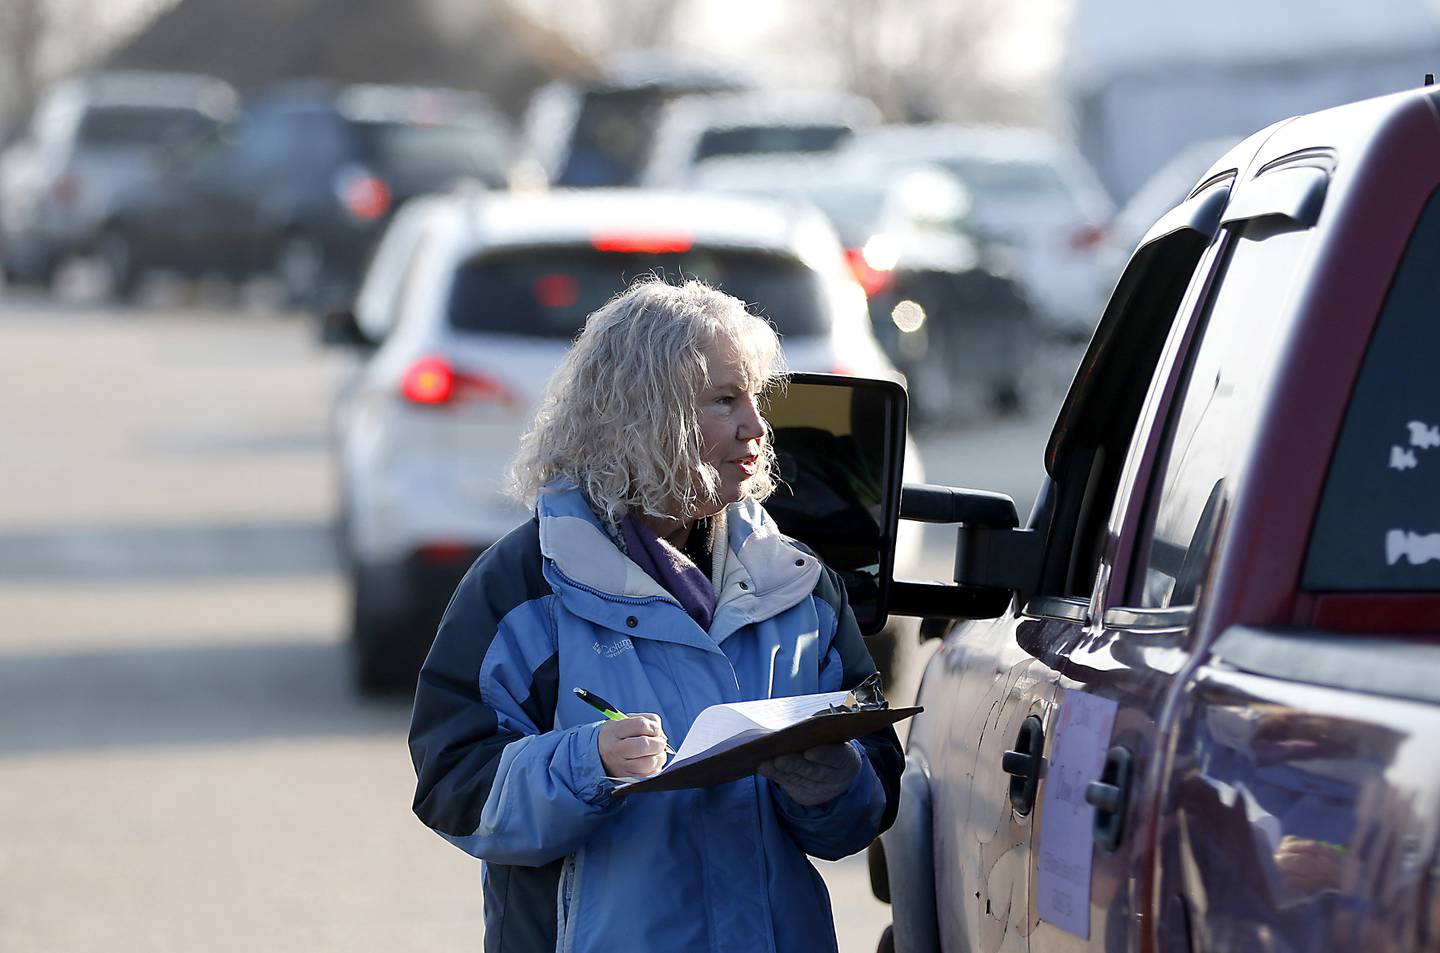 Volunteer Cindy Wiers collects information from a recipient as people wait in line Tuesday, Jan. 10, 2023, at the FISH of McHenry Food Pantry, 3515 N. Richmond Road in Johnsburg, to receive food. The pantry, which has changed how it distributes food since the COVID-19 pandemic, is now raising $150,000 to add more storage and a heated garage onto the building.